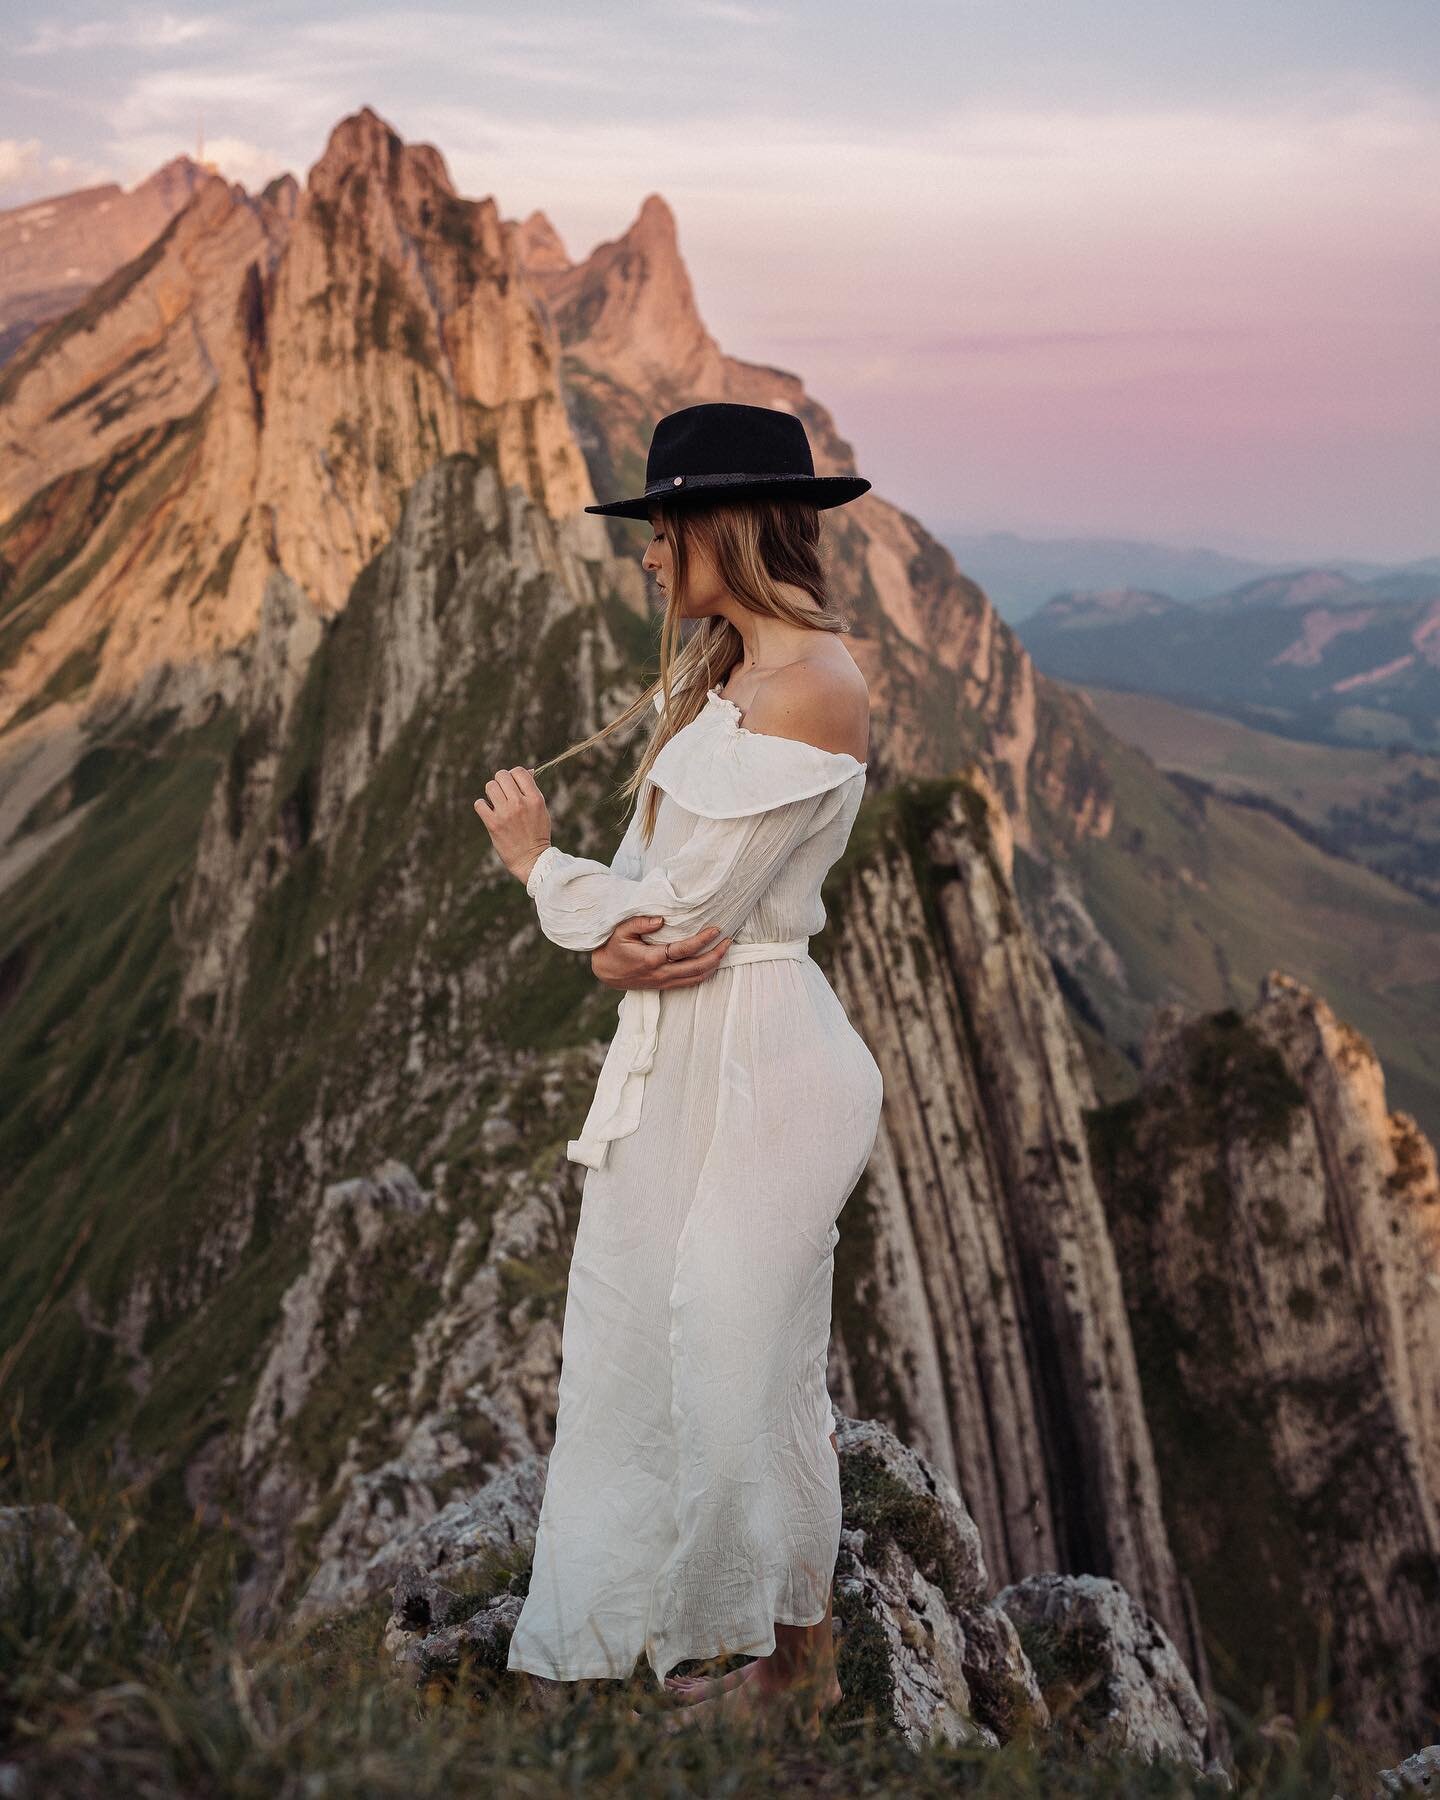 Staying up top of a mountain in a lodge was a pretty cool experience. It was so peaceful watching sunset with a beer in the cool mountain air. We rose early the next day to shoot some sunrise portraits. The peaks behind us were glowing pink. Definite